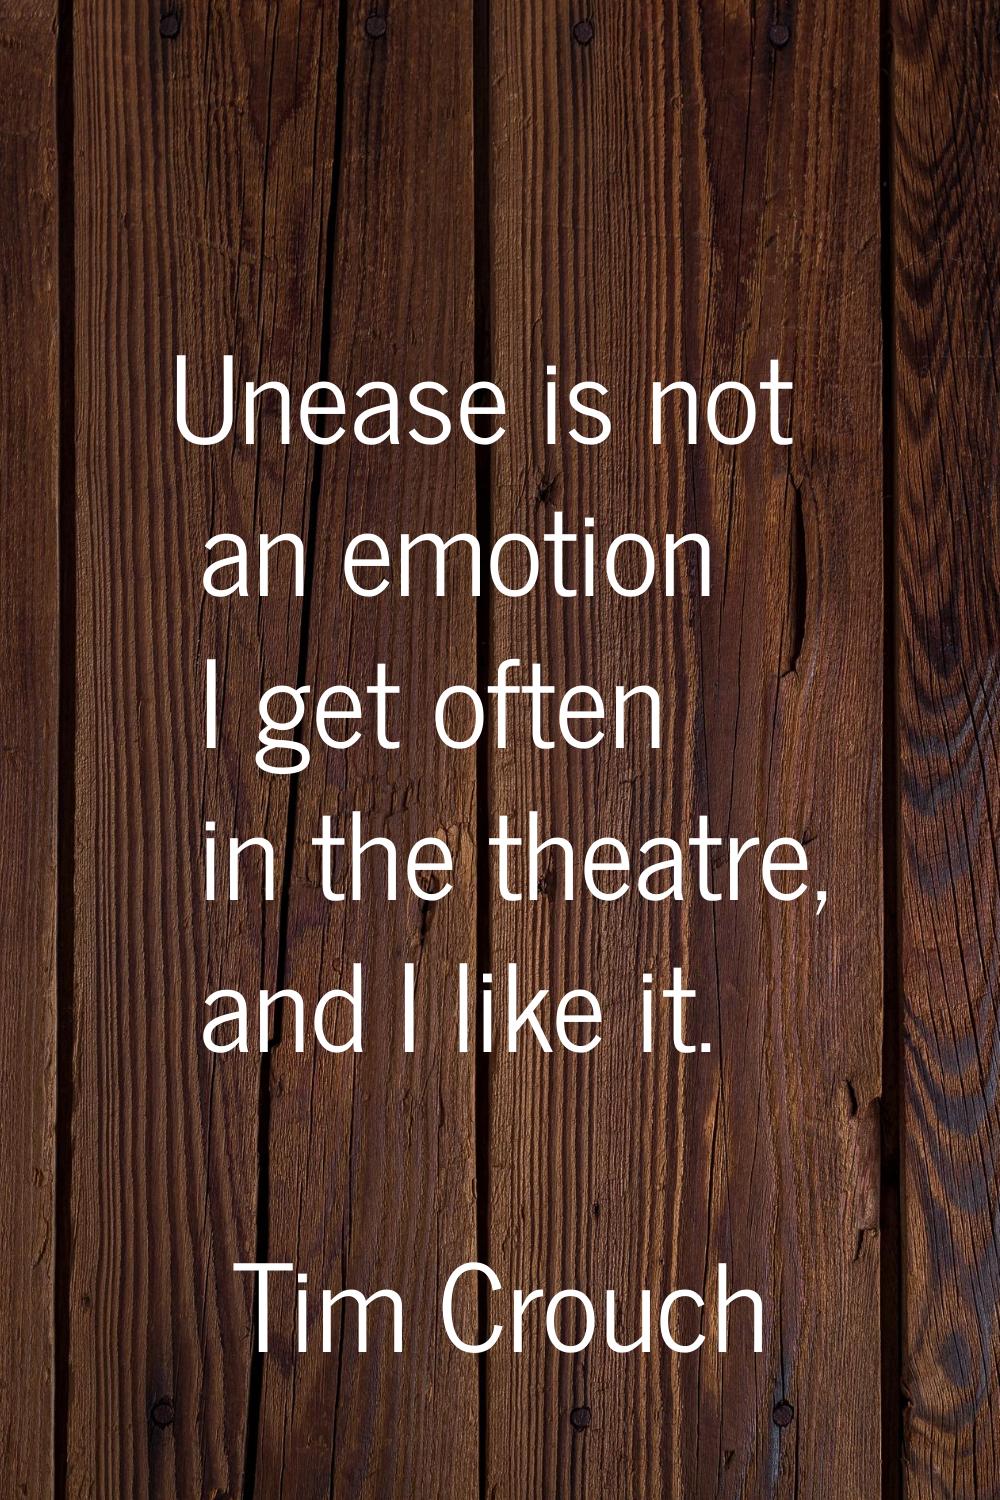 Unease is not an emotion I get often in the theatre, and I like it.